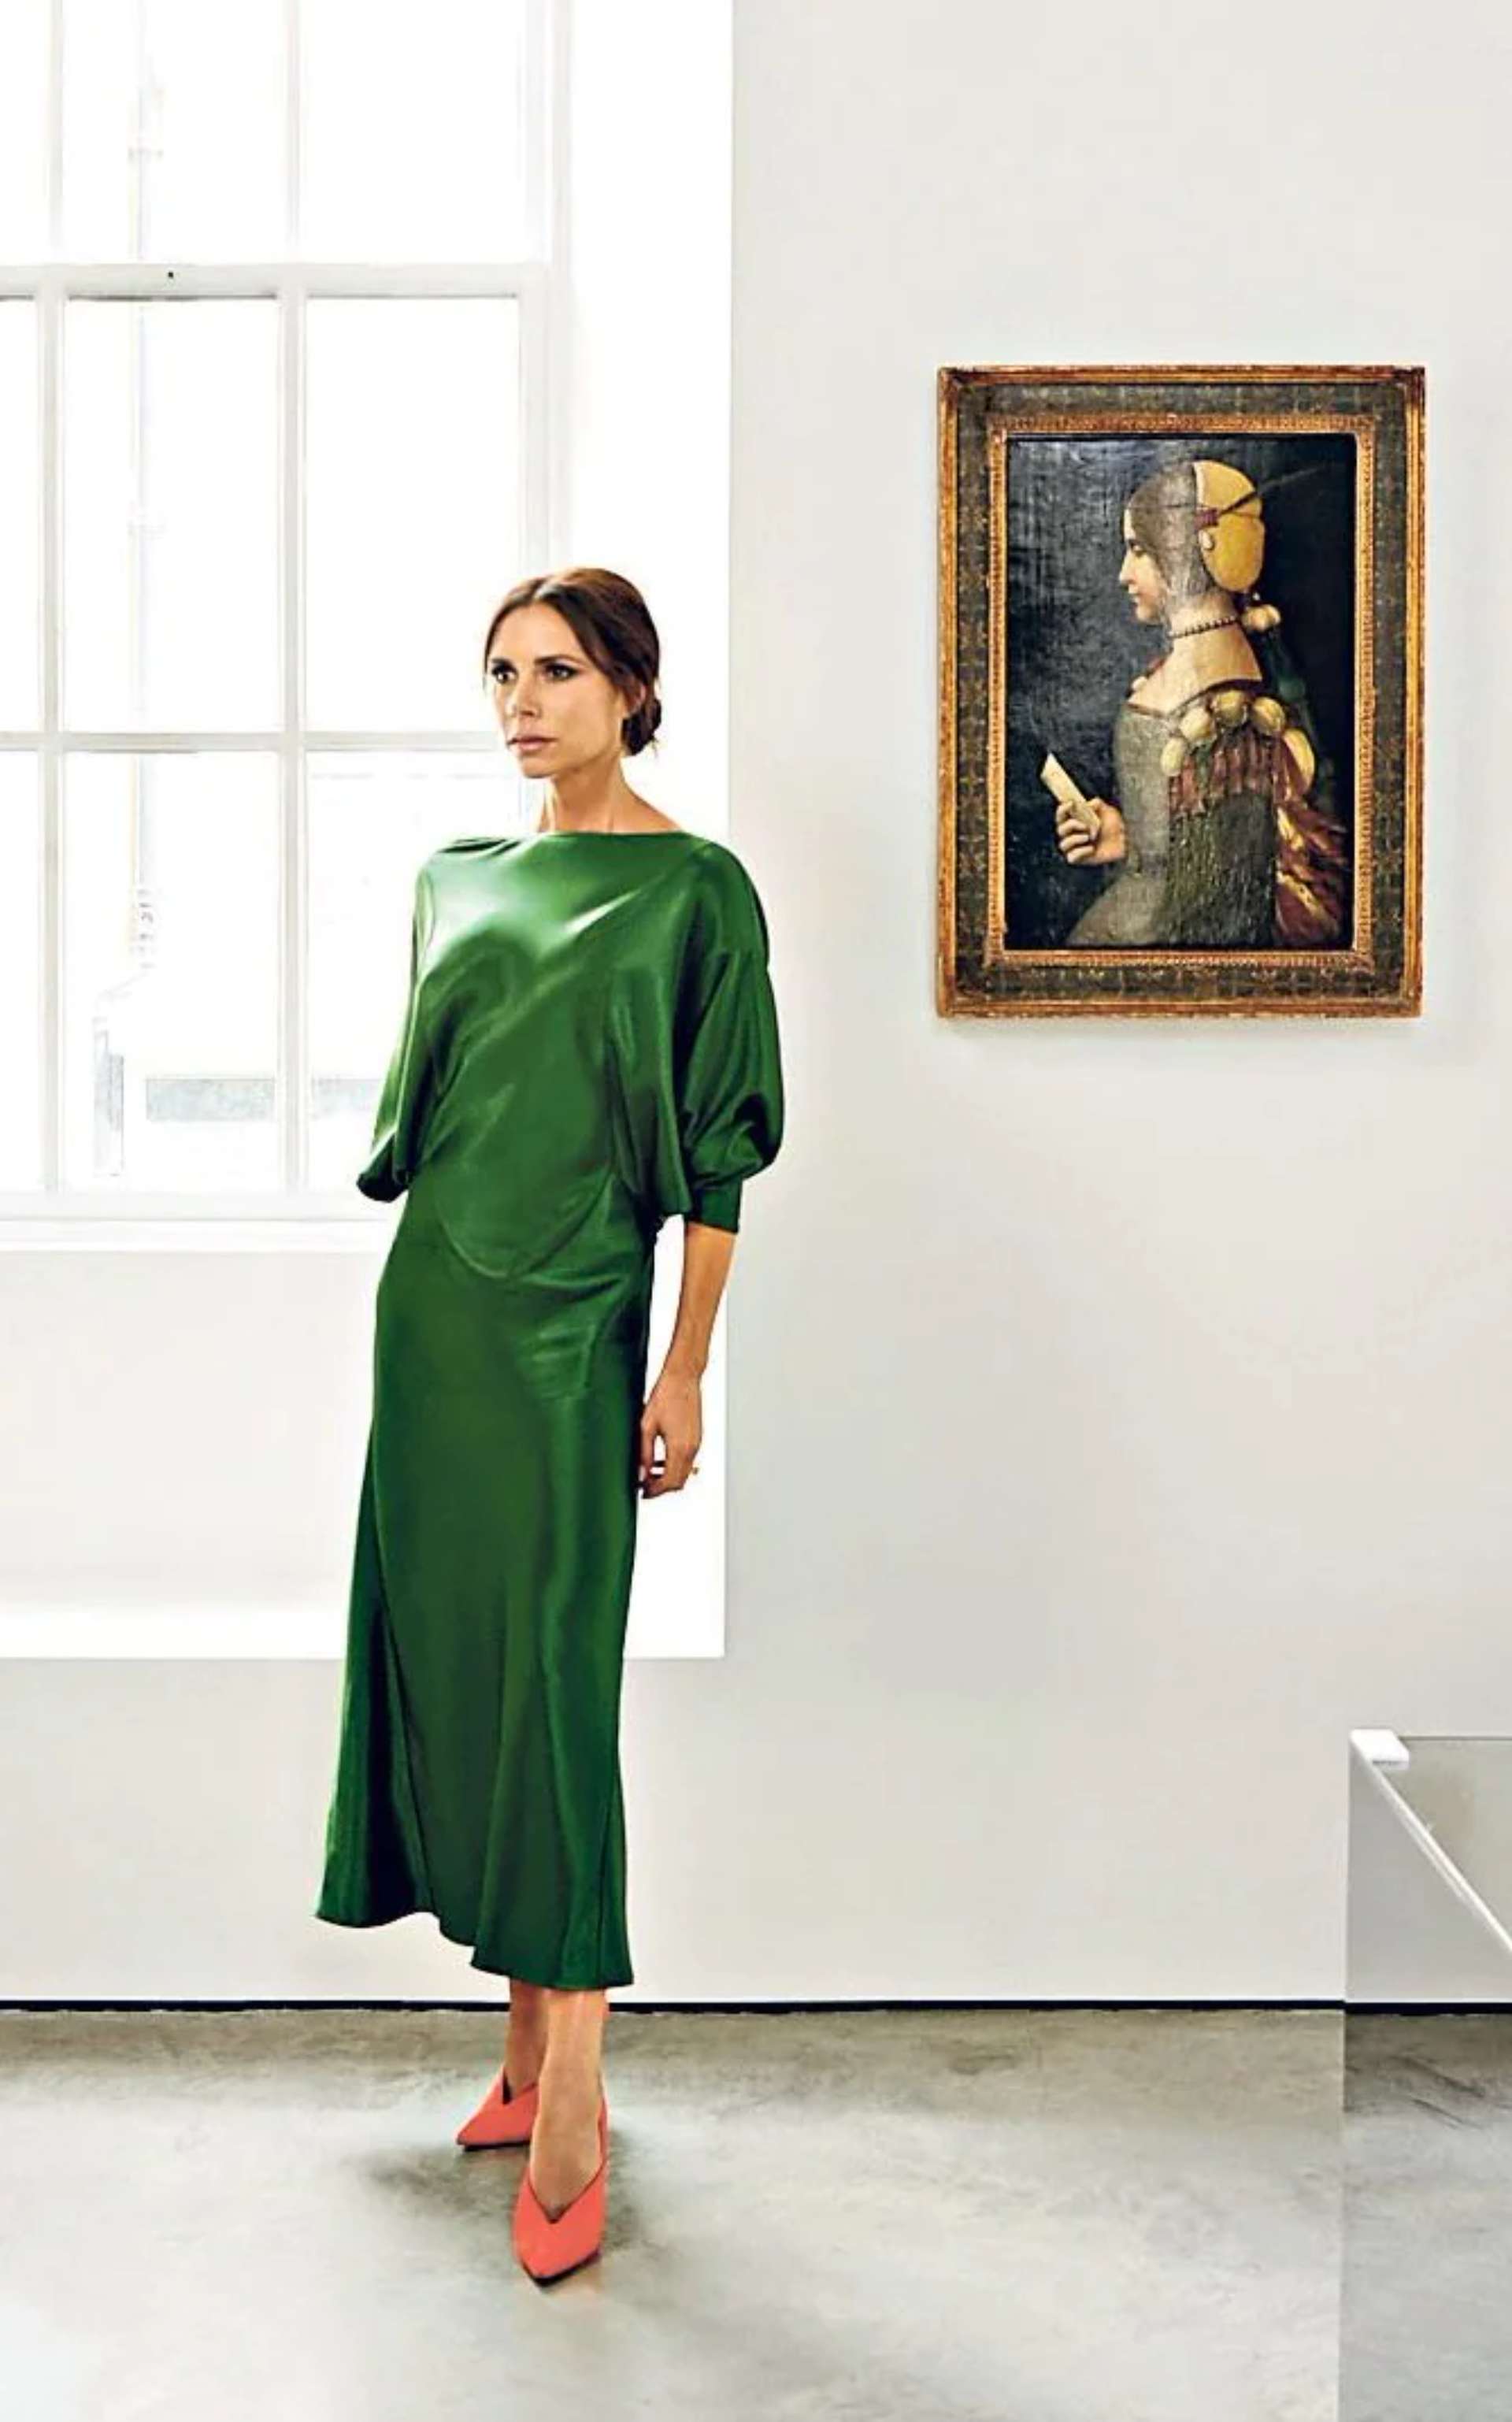 Victoria Beckham standing in her Dover Street store, wearing an emerald green silk dress and orange heels. Behind Beckham is a classic painting framed on the wall.